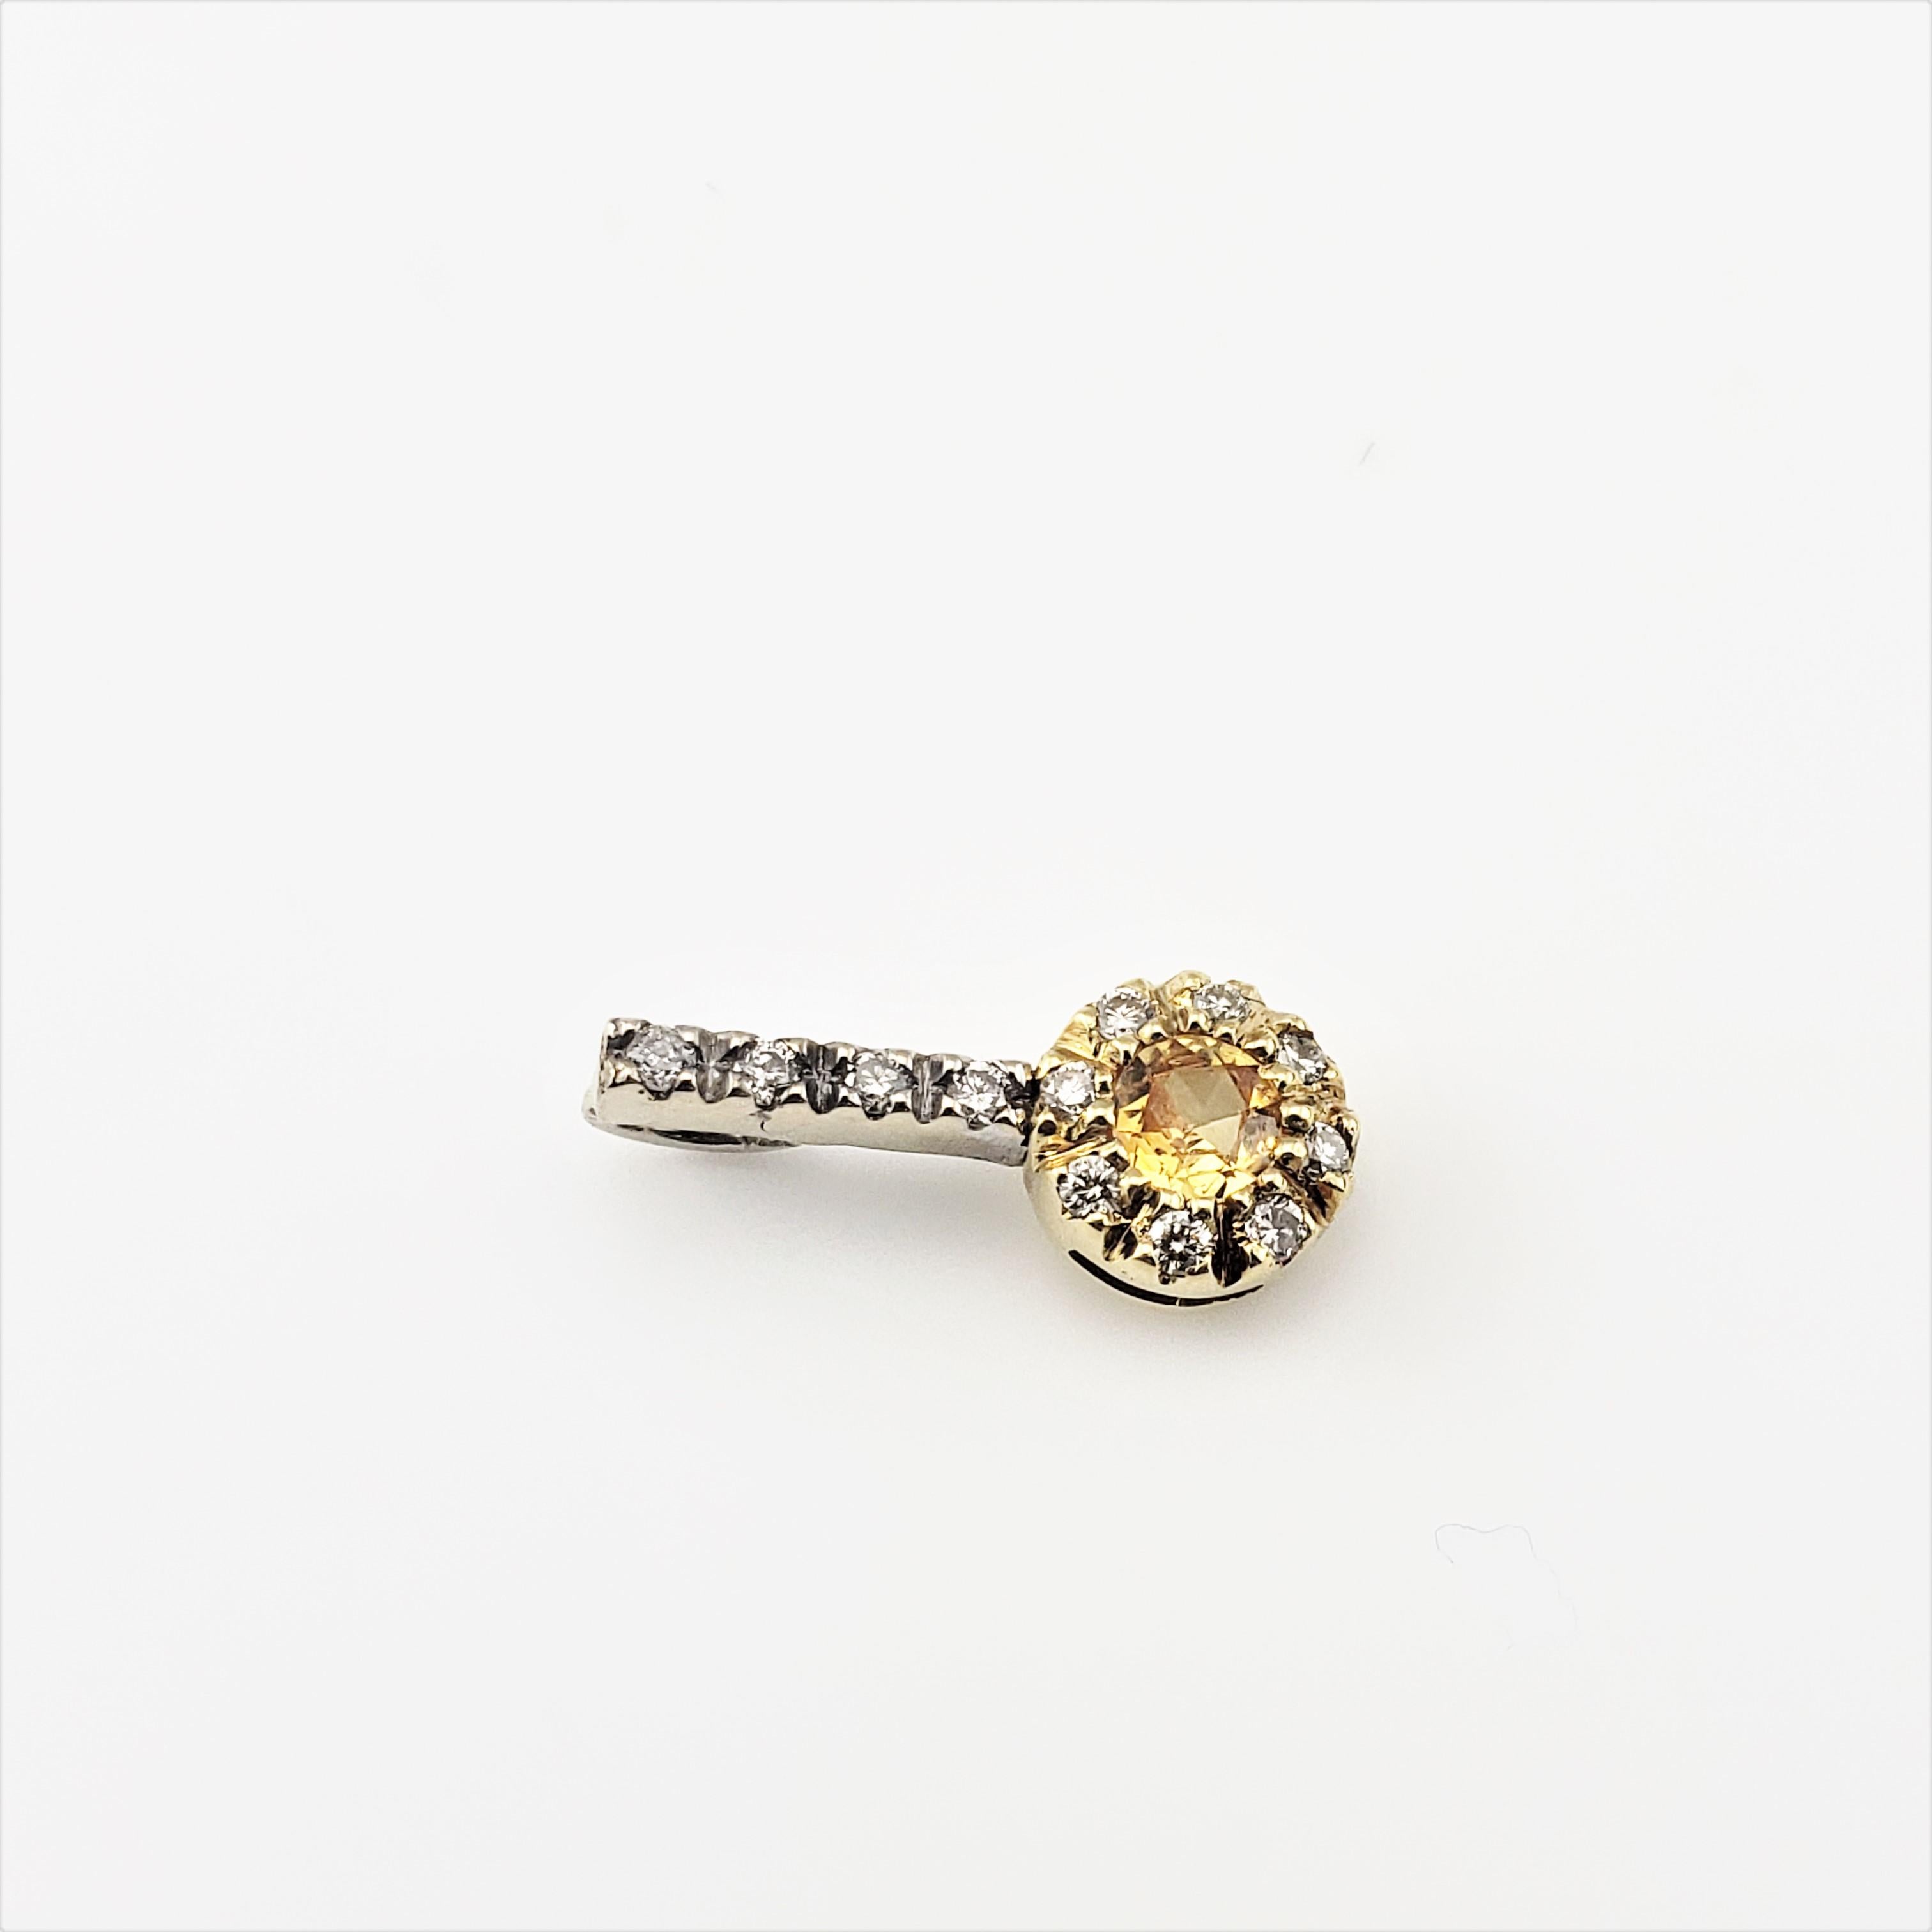 14 Karat Yellow and White Gold Yellow Sapphire and Diamond Pendant GAI Certified :

This lovely pendant features one round yellow sapphire (.35 ct.) and 12 round brilliant cut diamonds set in classic 14K yellow and white gold.

Matching earrings: 